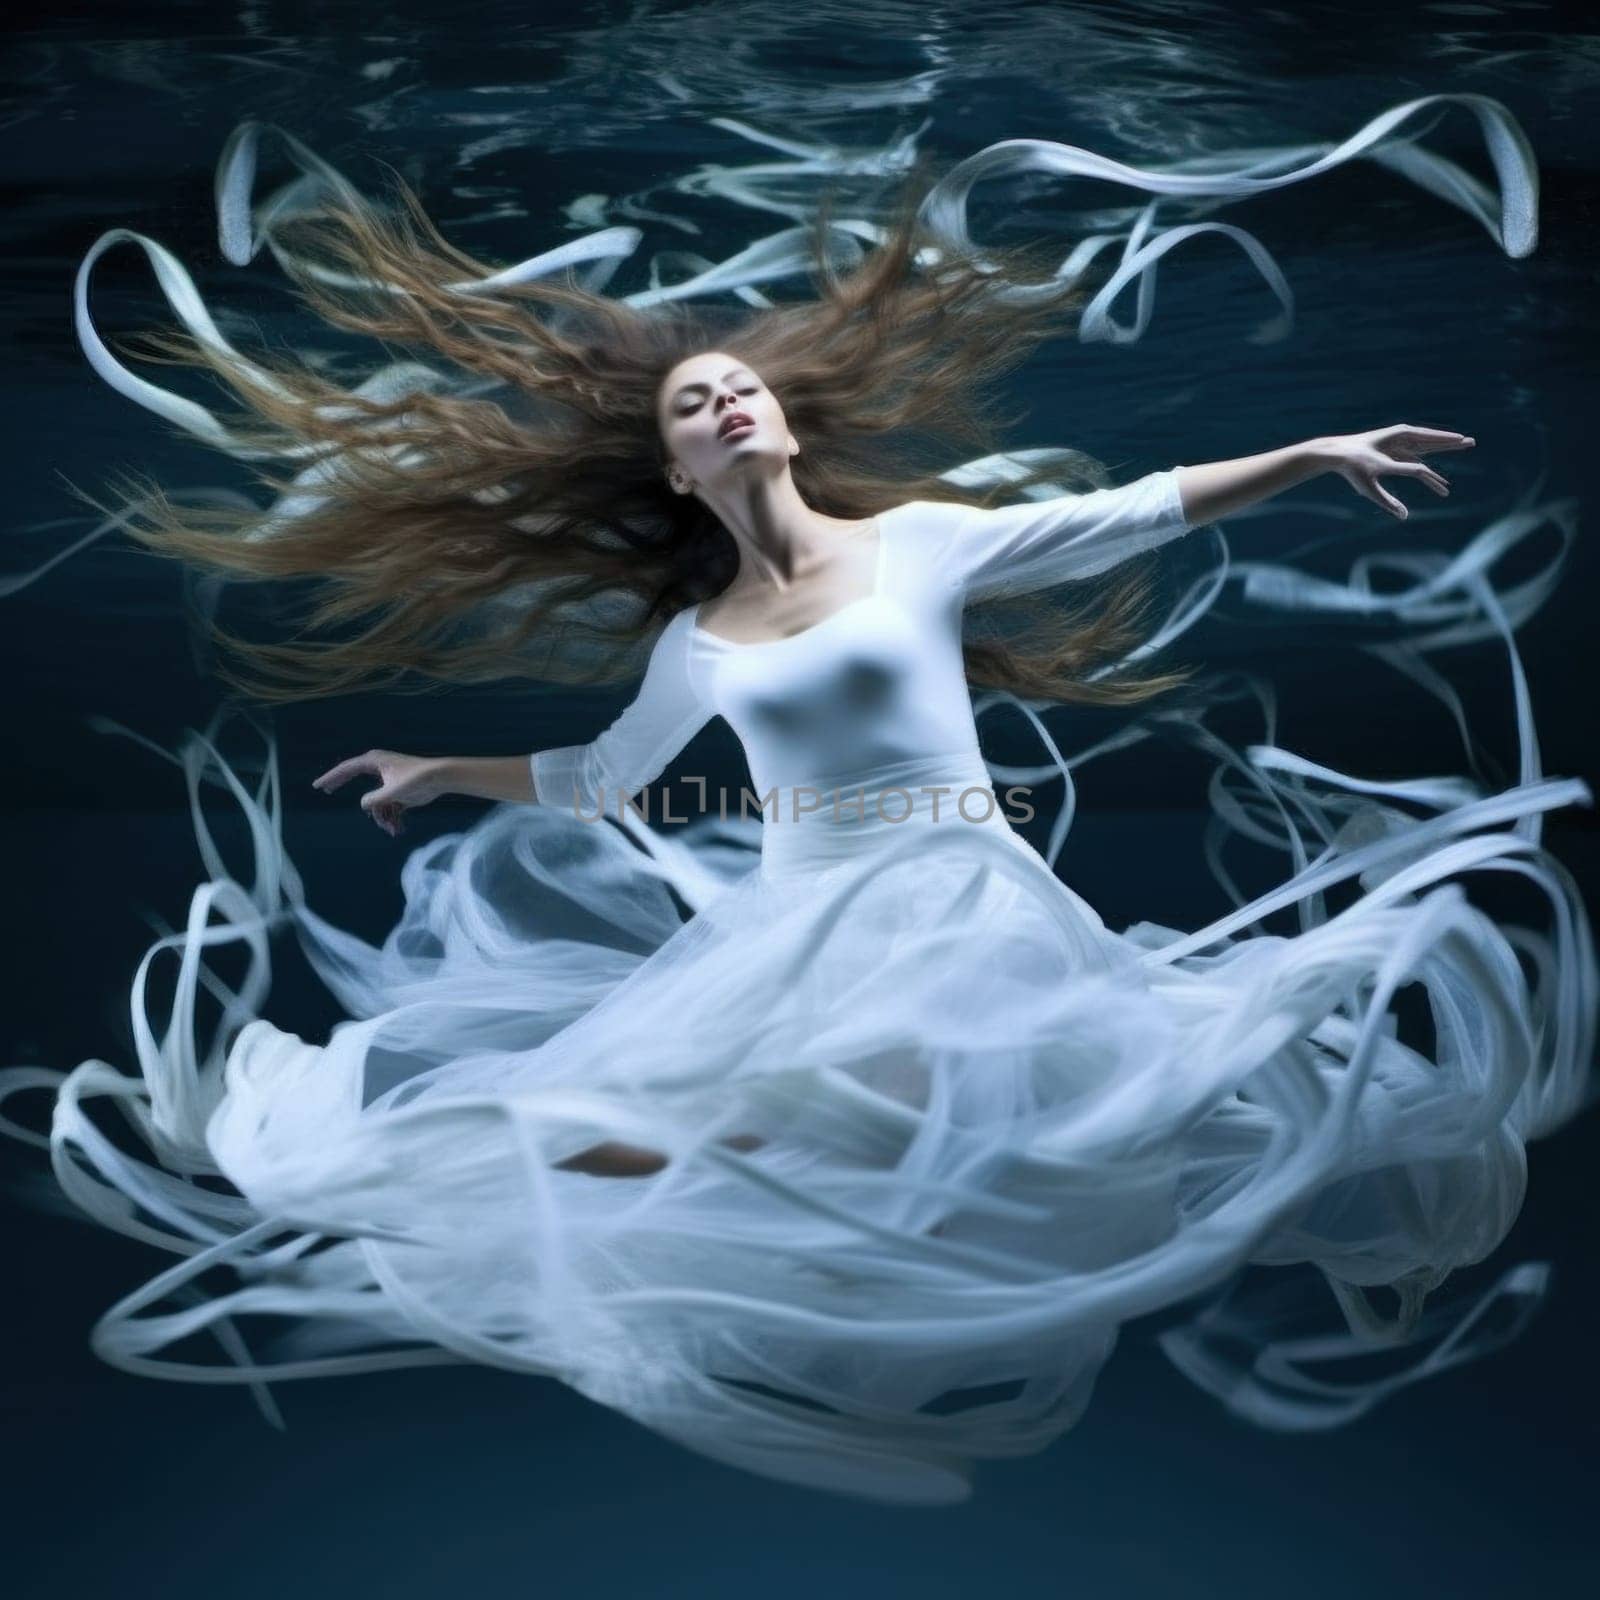 A woman in a white dress is underwater with her hair flowing